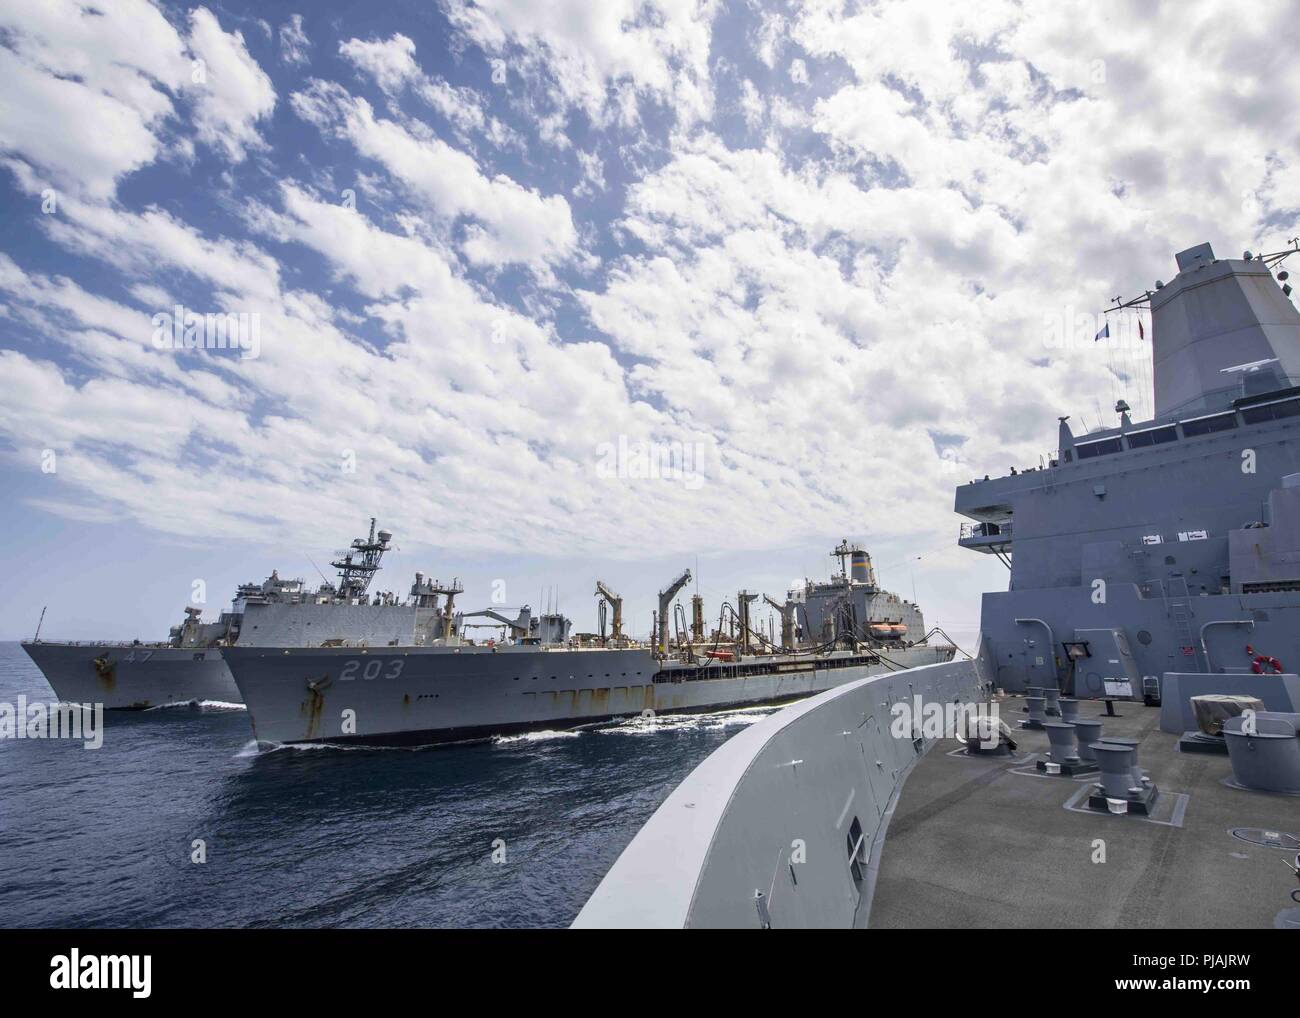 Gulf Of Aden. 4th Sep, 2018. GULF OF ADEN (Sept. 4, 2018) The San Antonio-class amphibious transport dock ship USS Anchorage (LPD 23), right, conducts a replenishment-at-sea with the Whidbey Island-class amphibious dock landing ship USS Rushmore (LSD 47) and the fleet replenishment oiler USNS Laramie (T-AO 203) during a scheduled deployment of the Essex Amphibious Ready Group (ARG) and the 13th Marine Expeditionary Unit (MEU). The Essex ARG/13th MEU is a lethal, flexible, and persistent Navy-Marine Corps team deployed to the U.S. 5th Fleet area of operations in support of naval operation Stock Photo